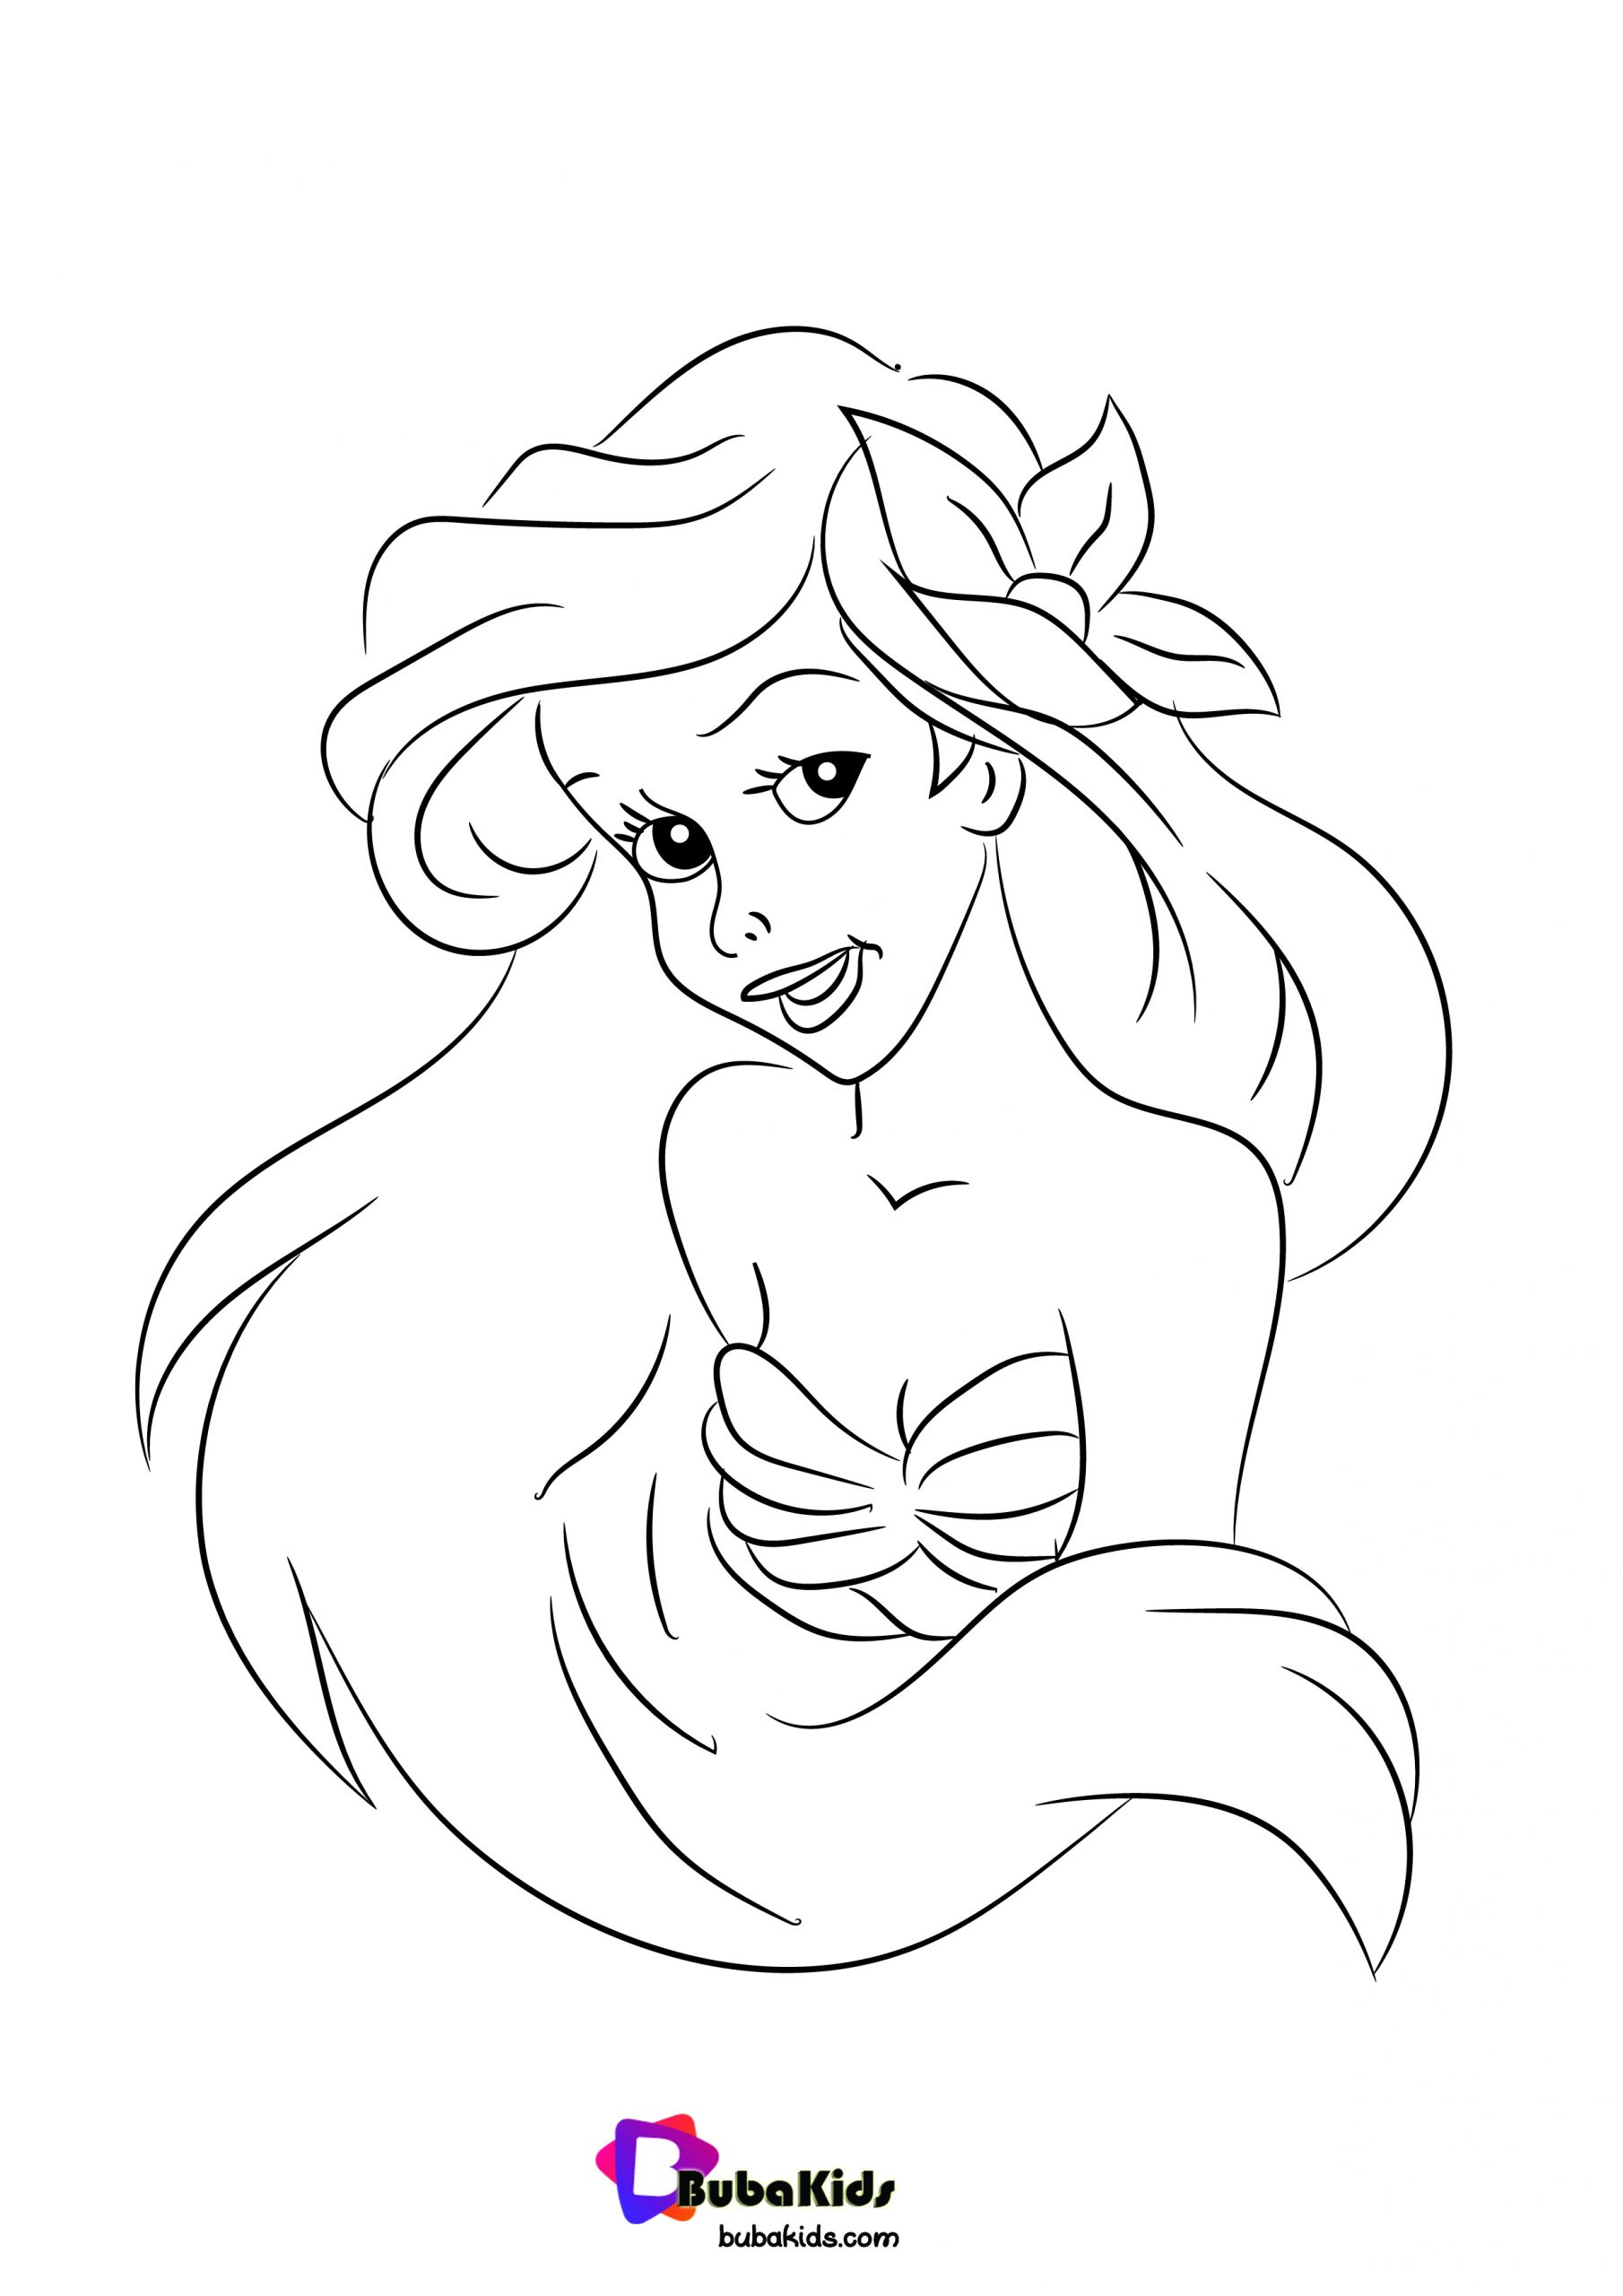 Disney Princess Ariel Coloring Pages Free By Bubakids Wallpaper